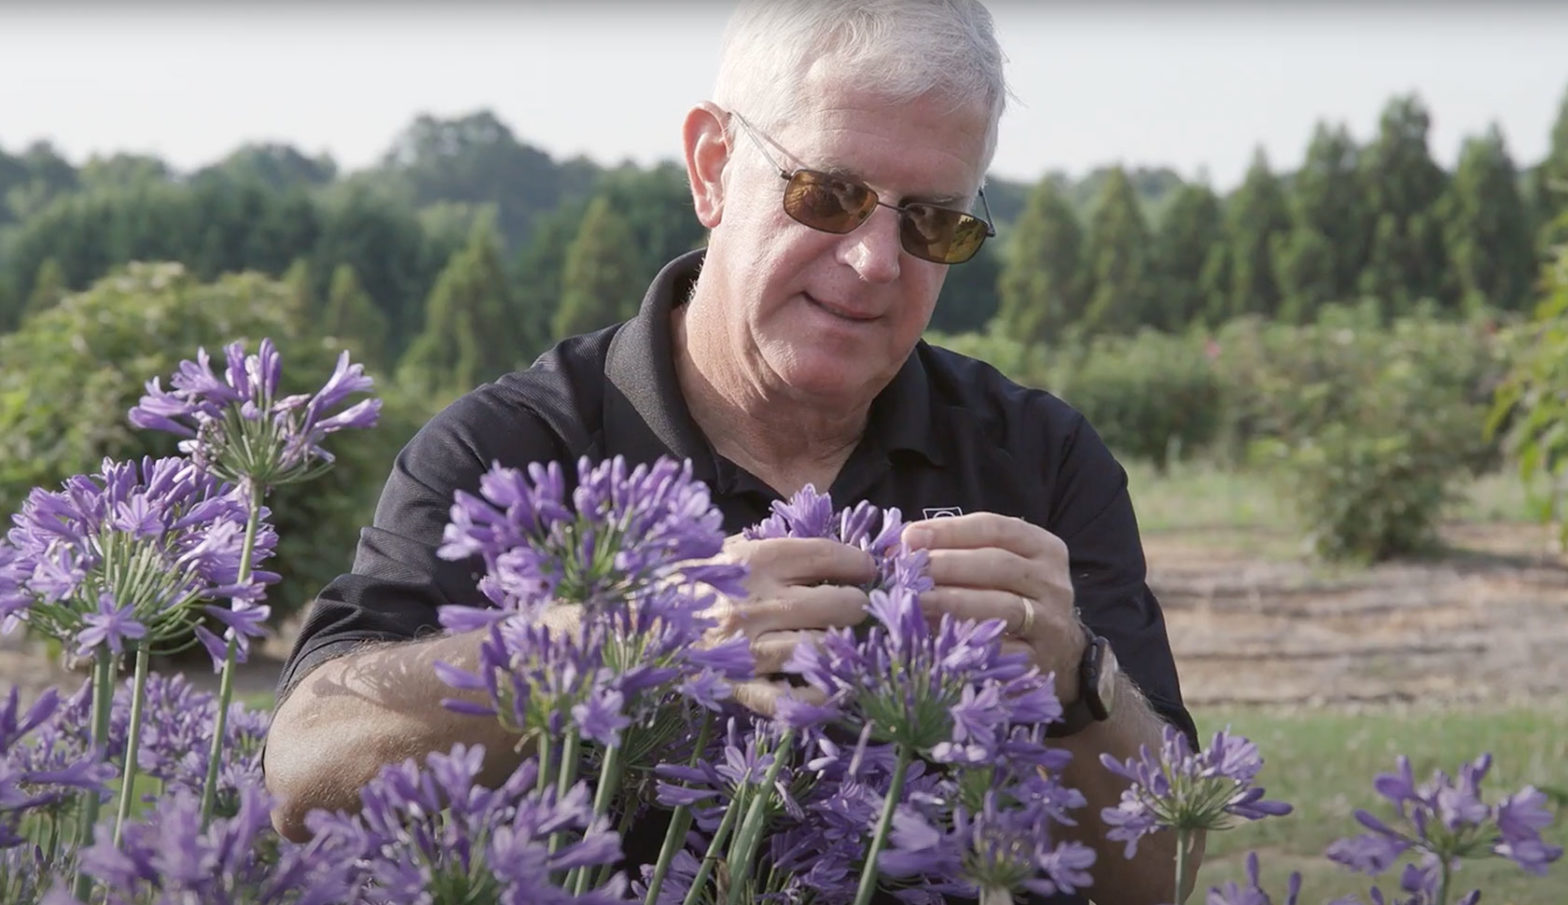 University of Georgia researcher John Ruter works with flowers in the field